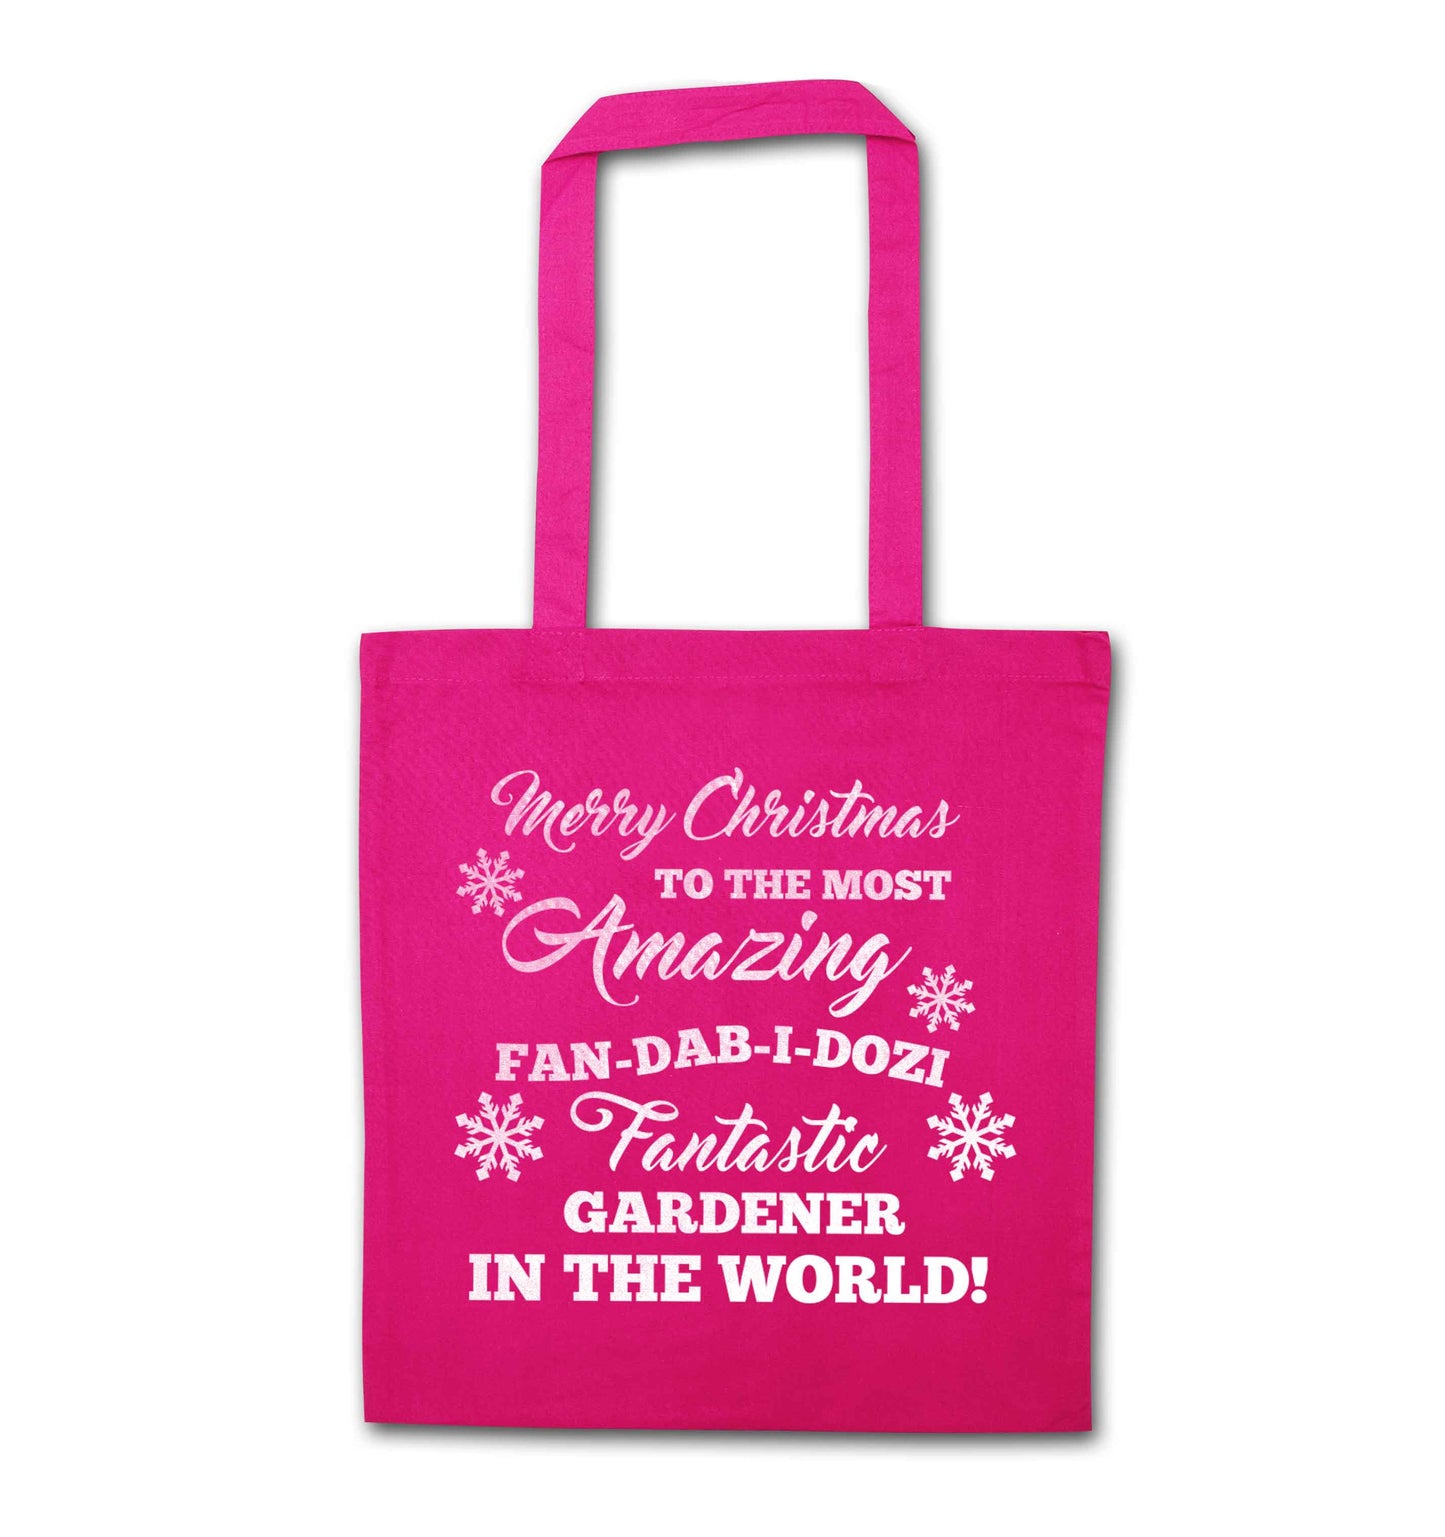 Merry Christmas to the most amazing gardener in the world! pink tote bag